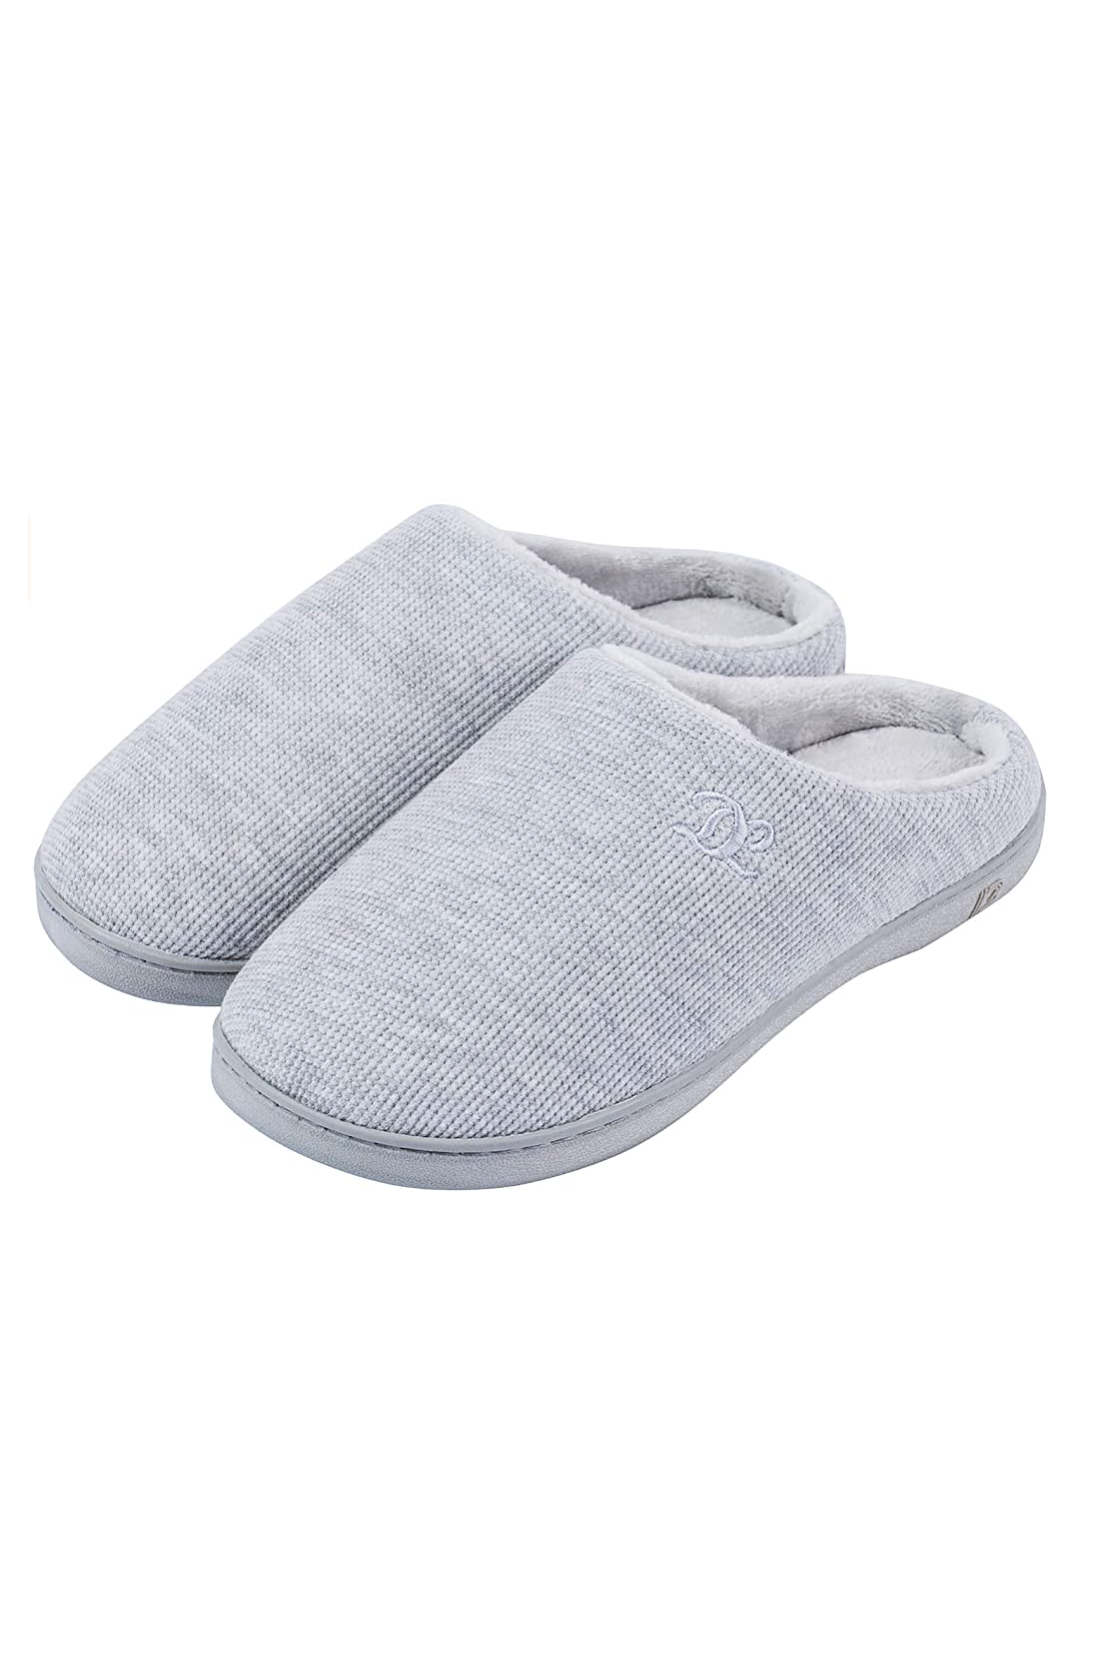 best washable slippers